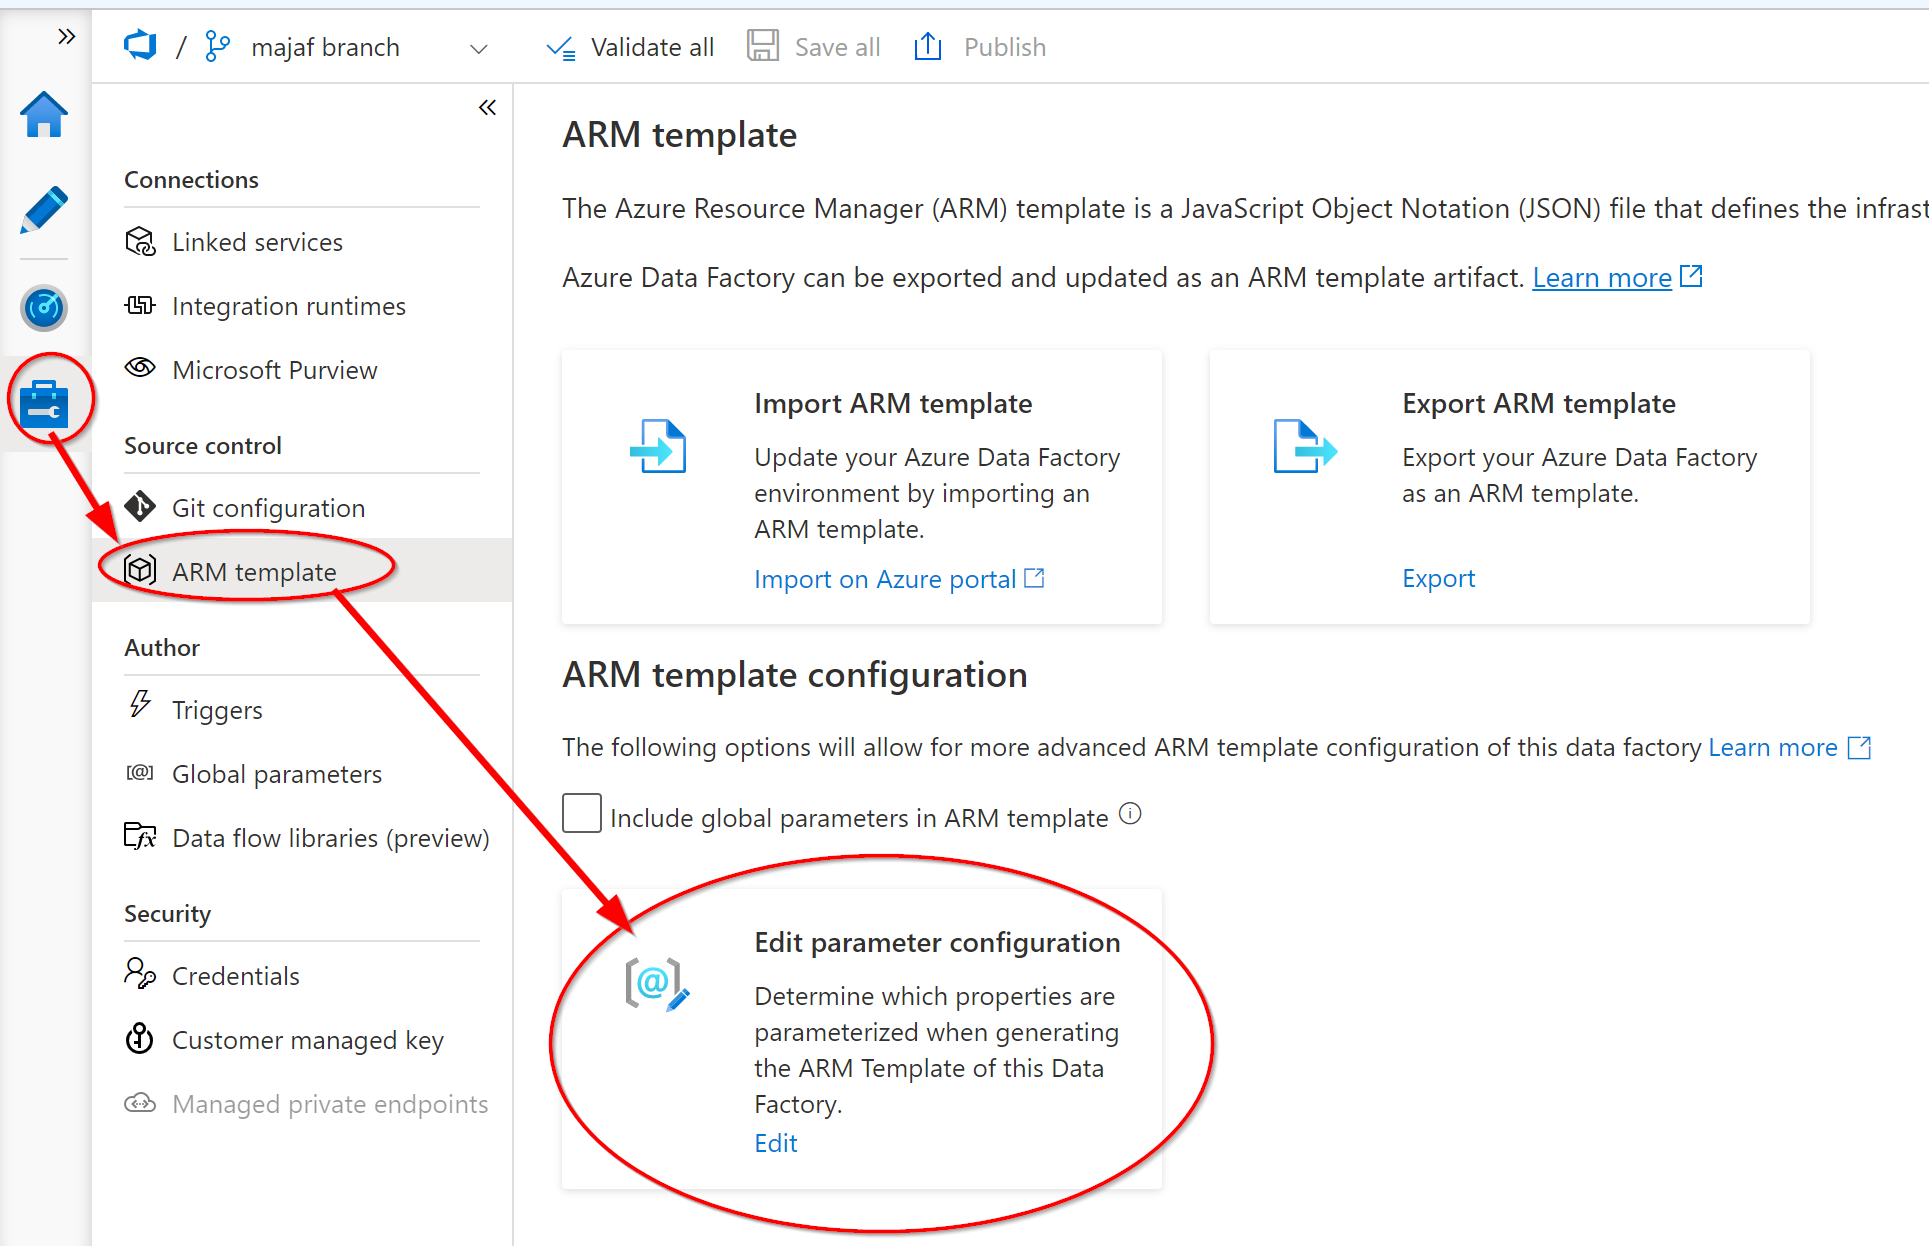 How to get to ARM Template configuration